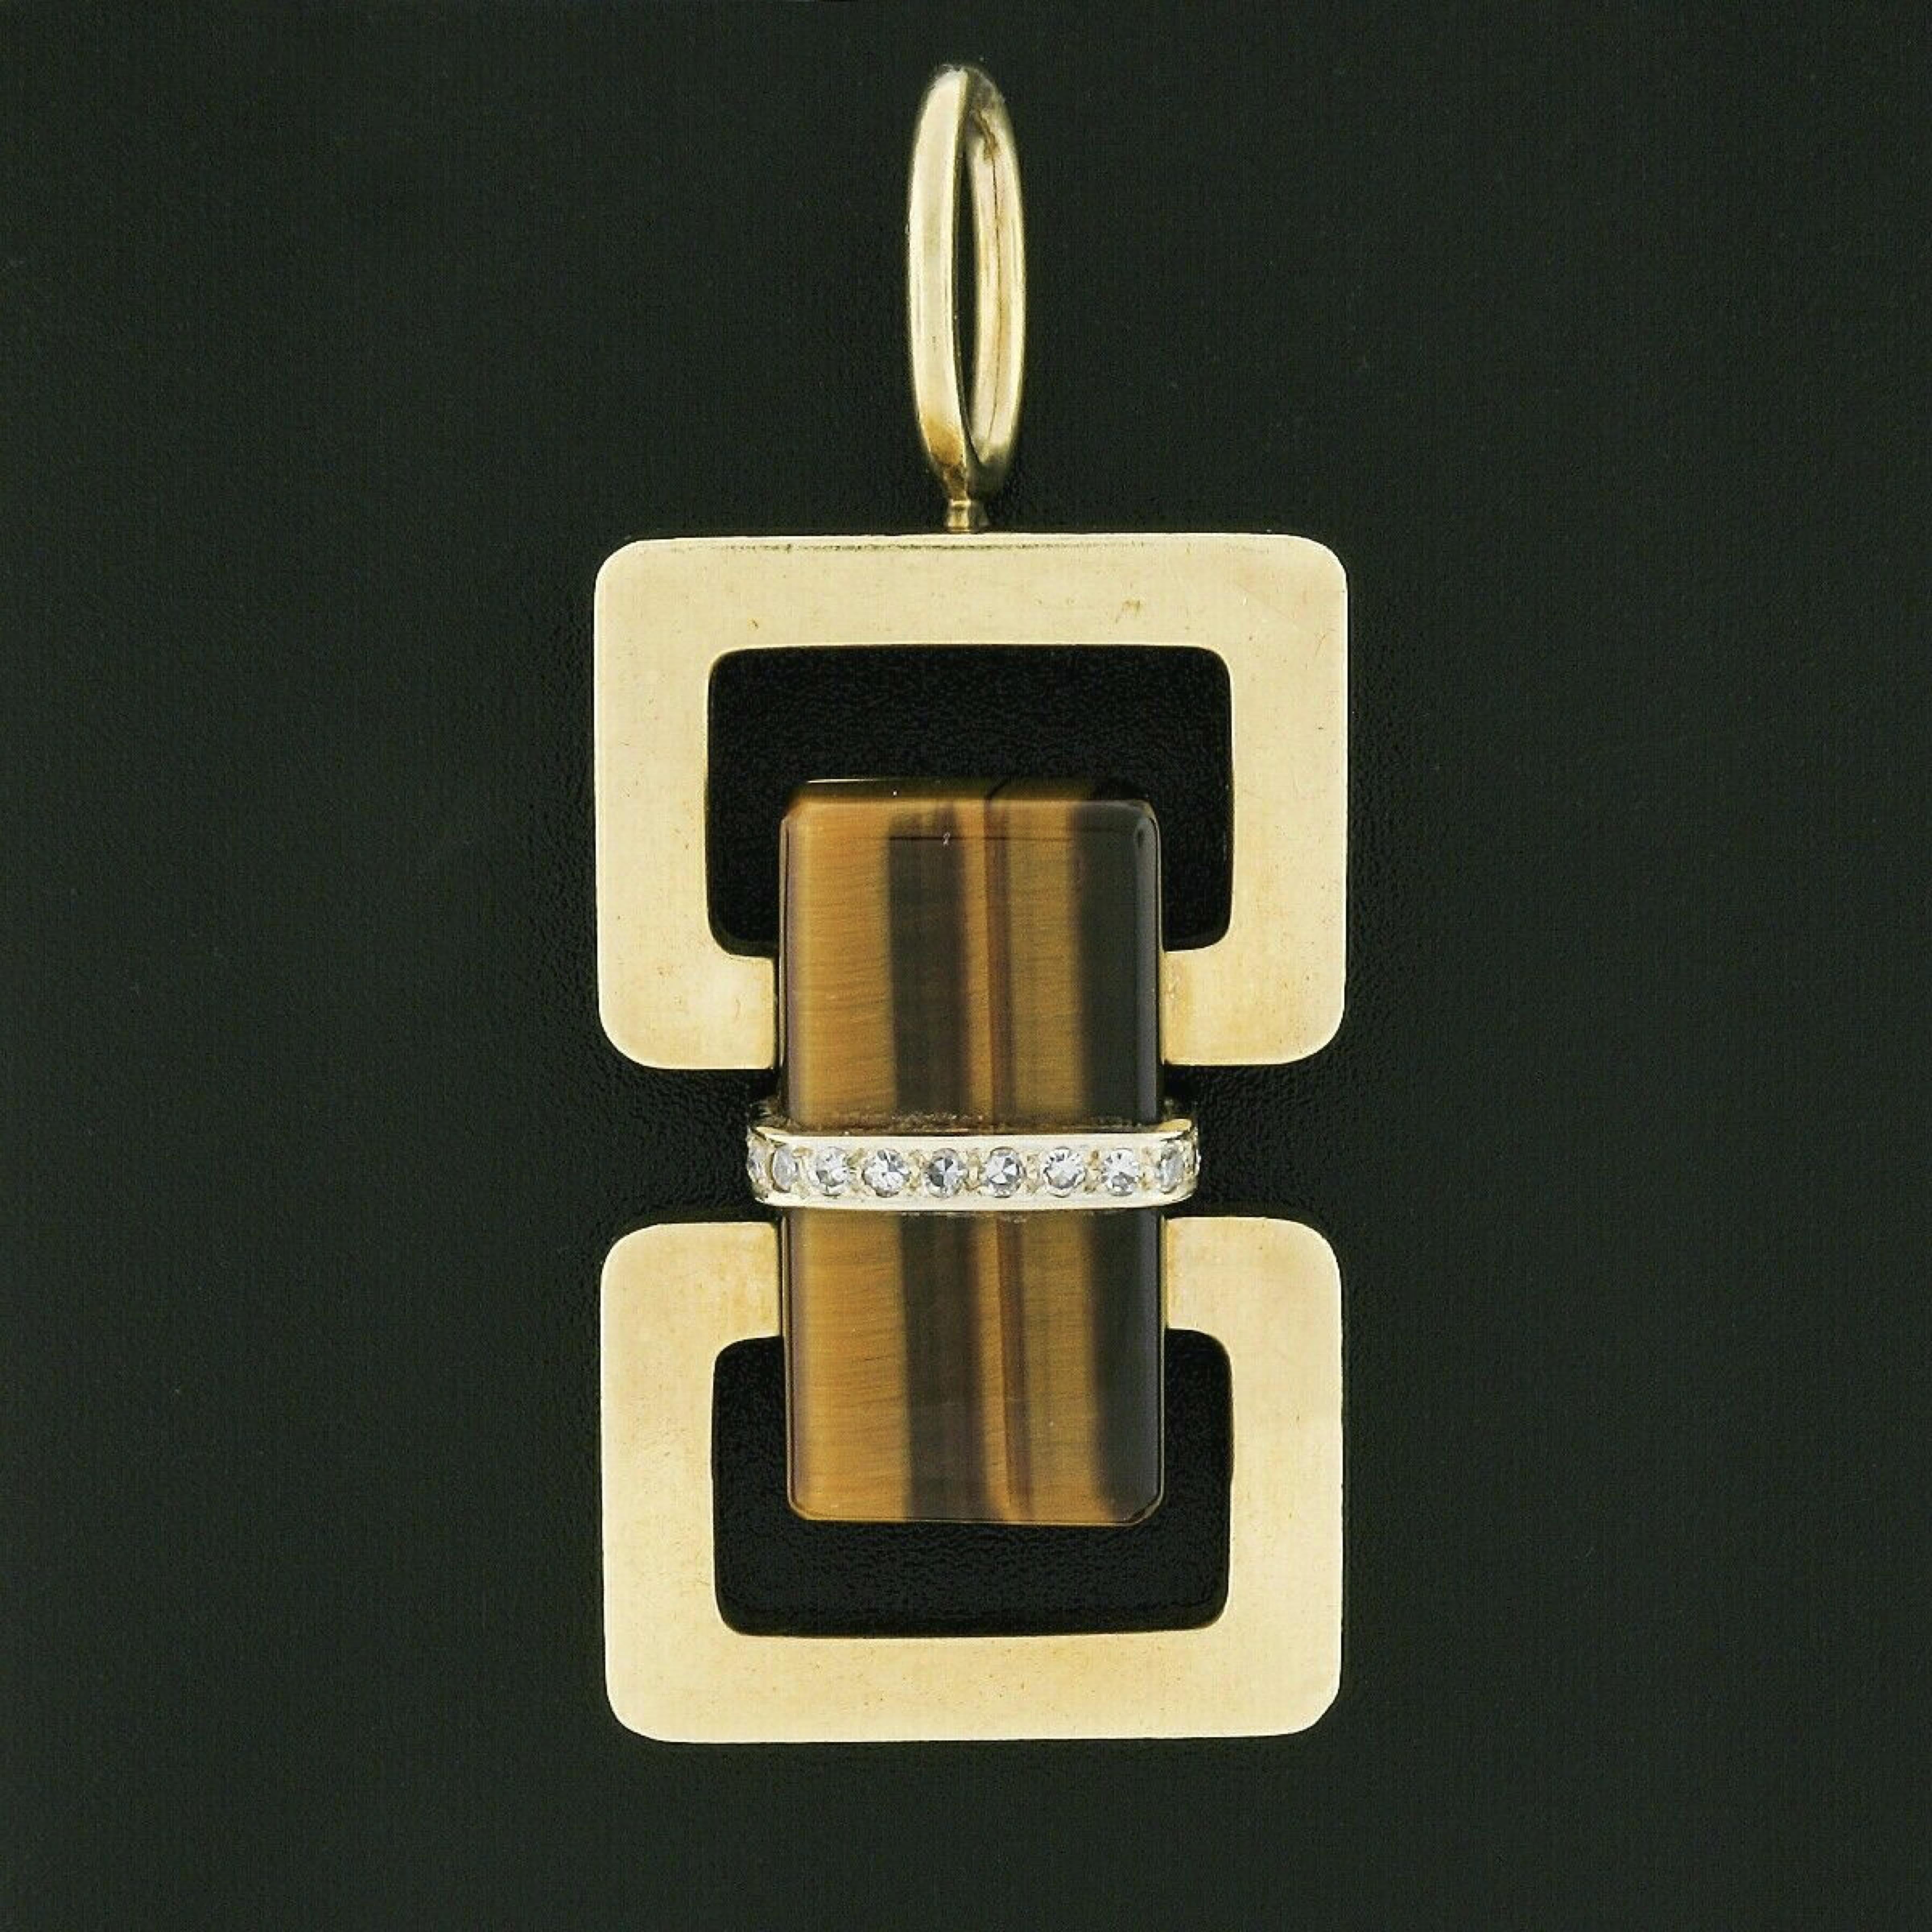 Here we have a magnificent vintage statement pendant that was crafted in solid 18k yellow gold and features a neat geometric design with a large rectangular polished cut tiger's eye set at the center of the dual open rectangular shaped design. The